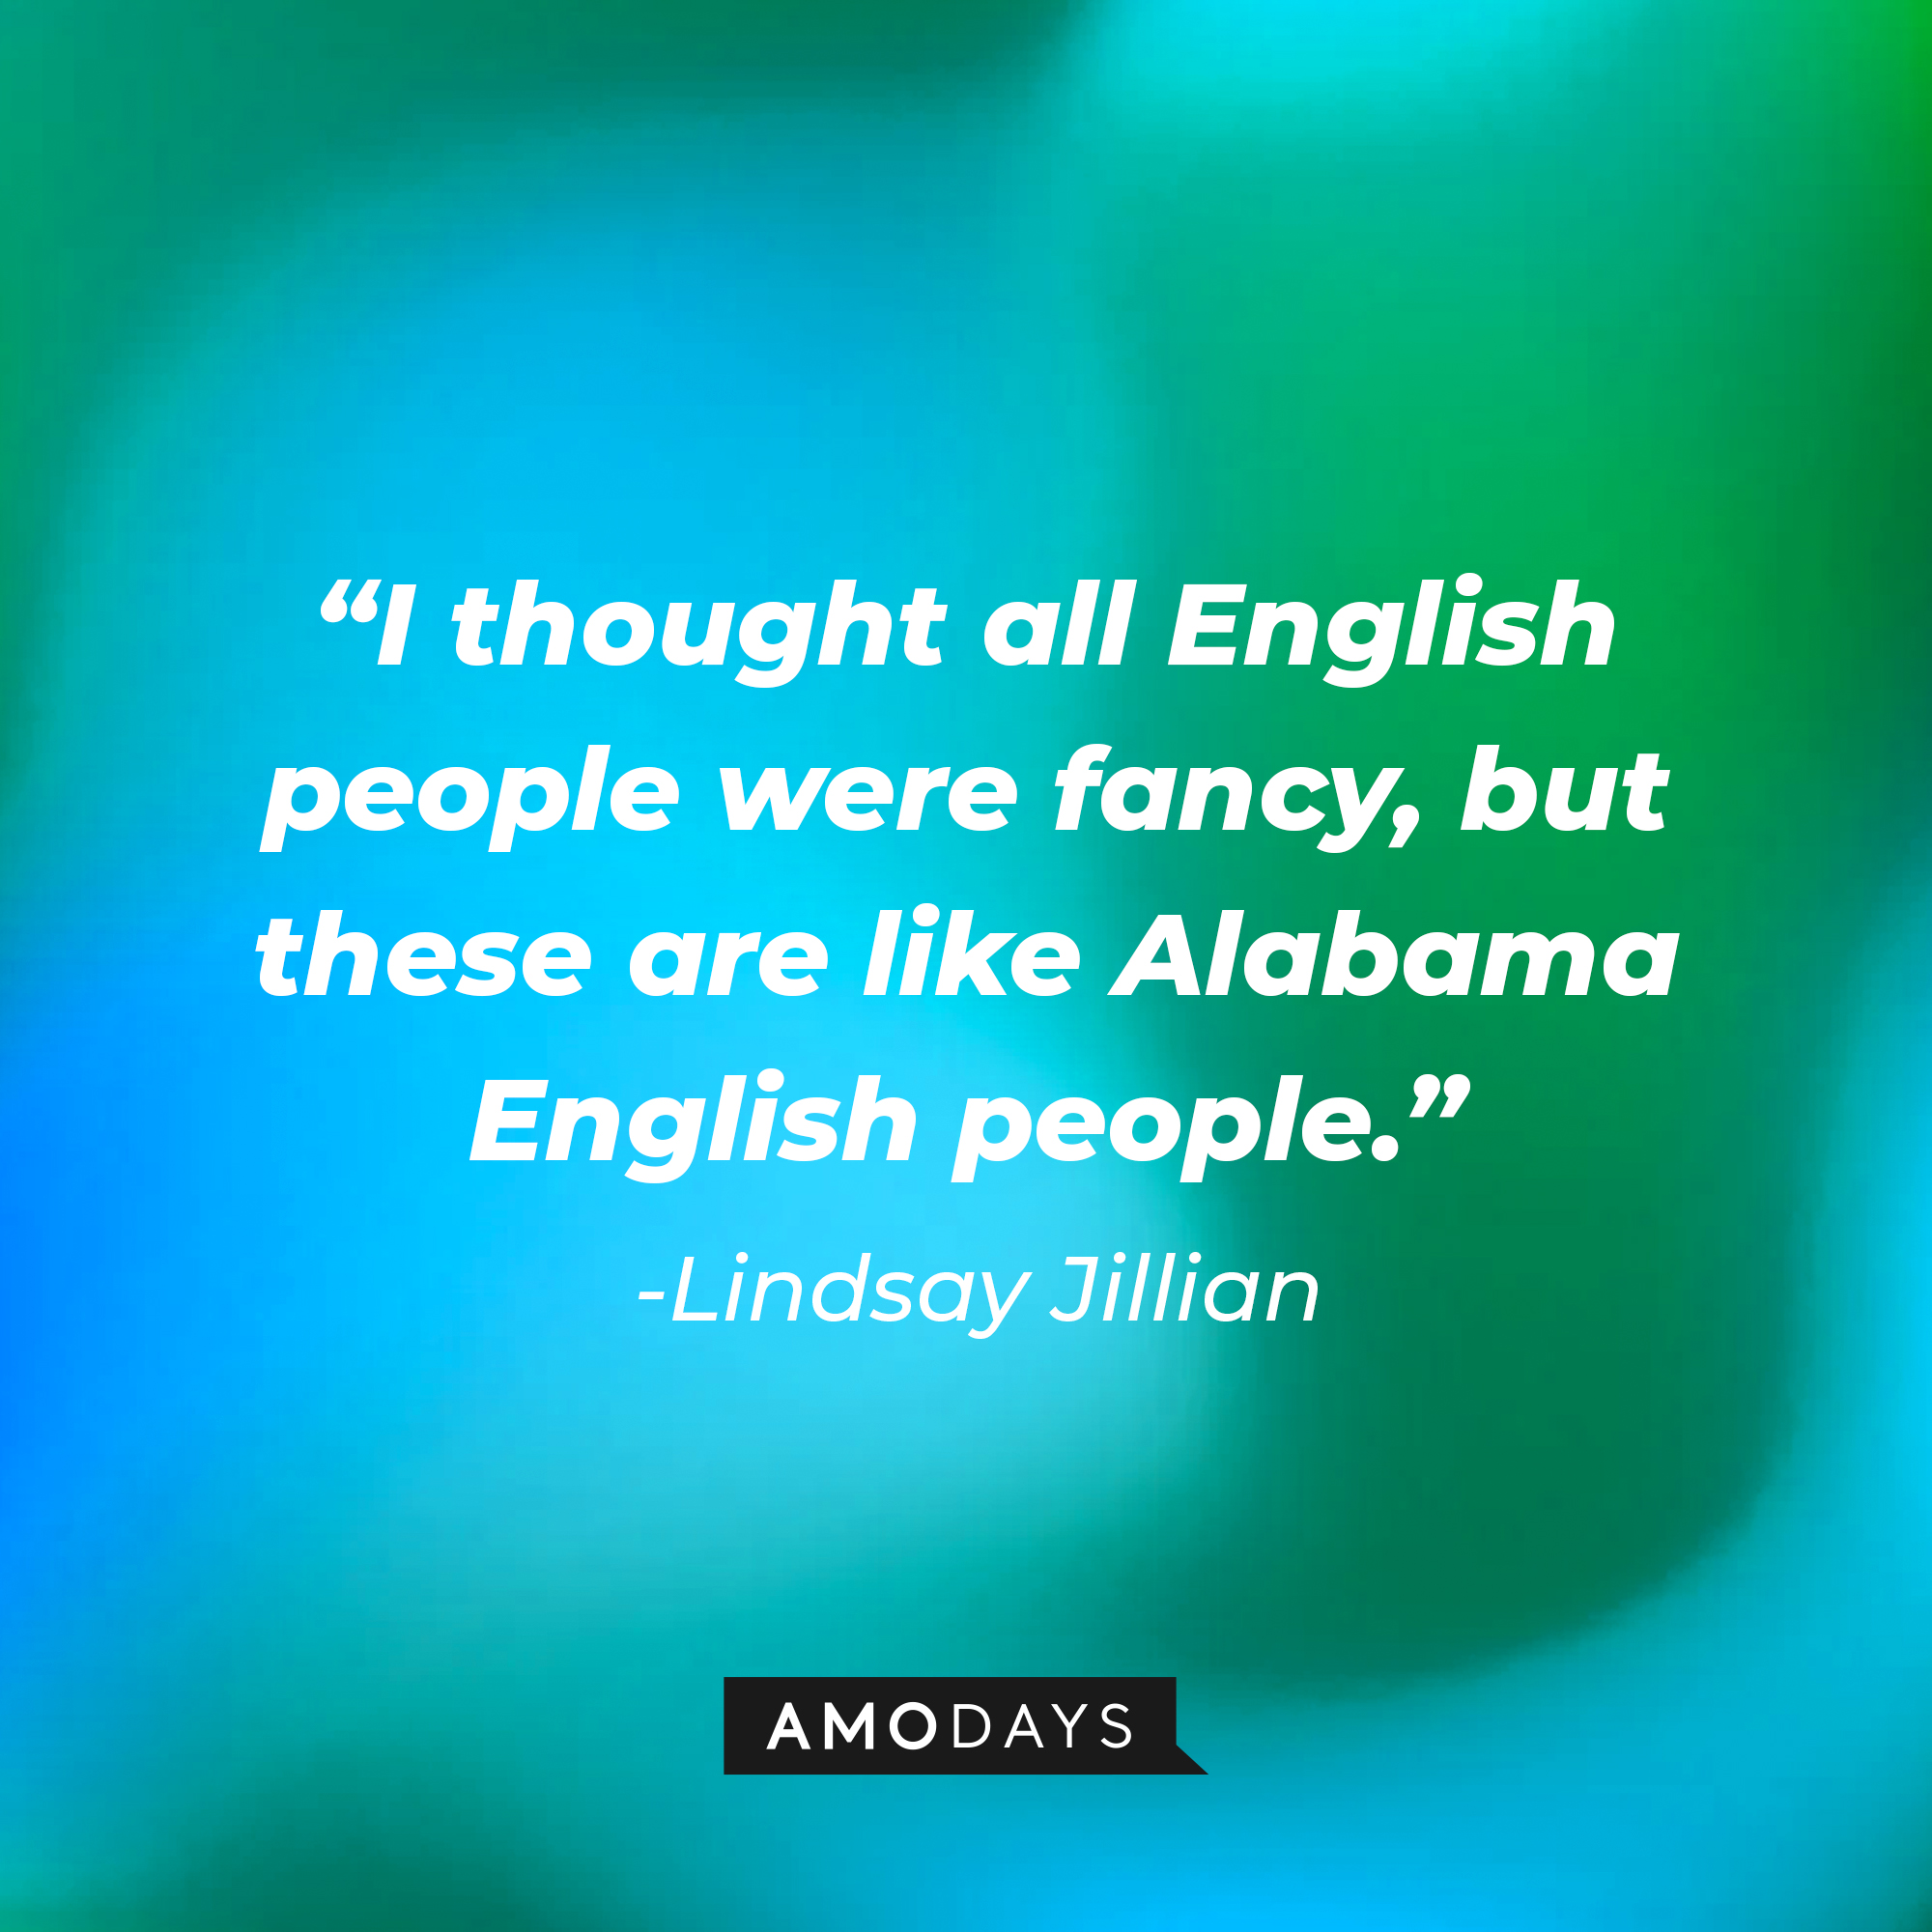 Lindsay Jillian’s quote: “I thought all English people were fancy, but these are like Alabama English people.” | Source: AmoDays